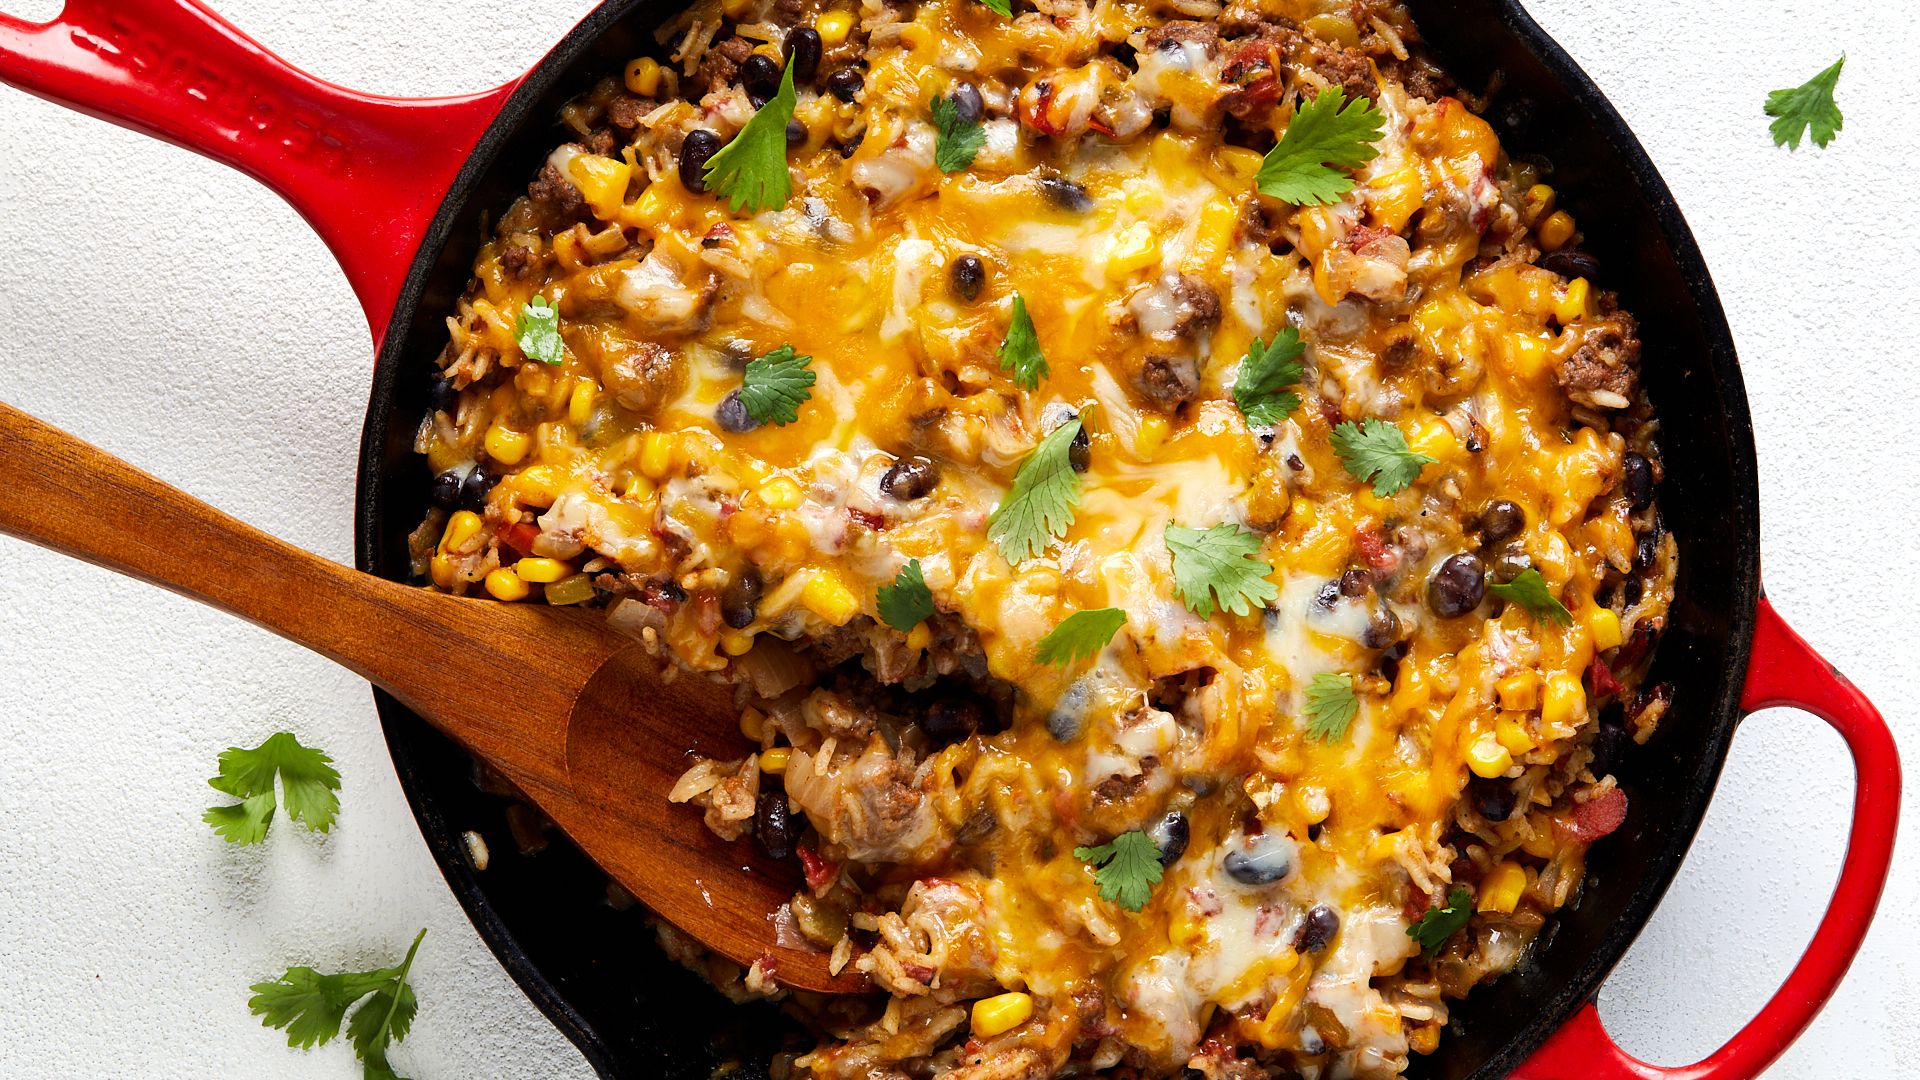 https://hips.hearstapps.com/hmg-prod/images/mexican-beef-n-rice-skillet1-1665593962.jpg?crop=1xw:0.84375xh;center,top